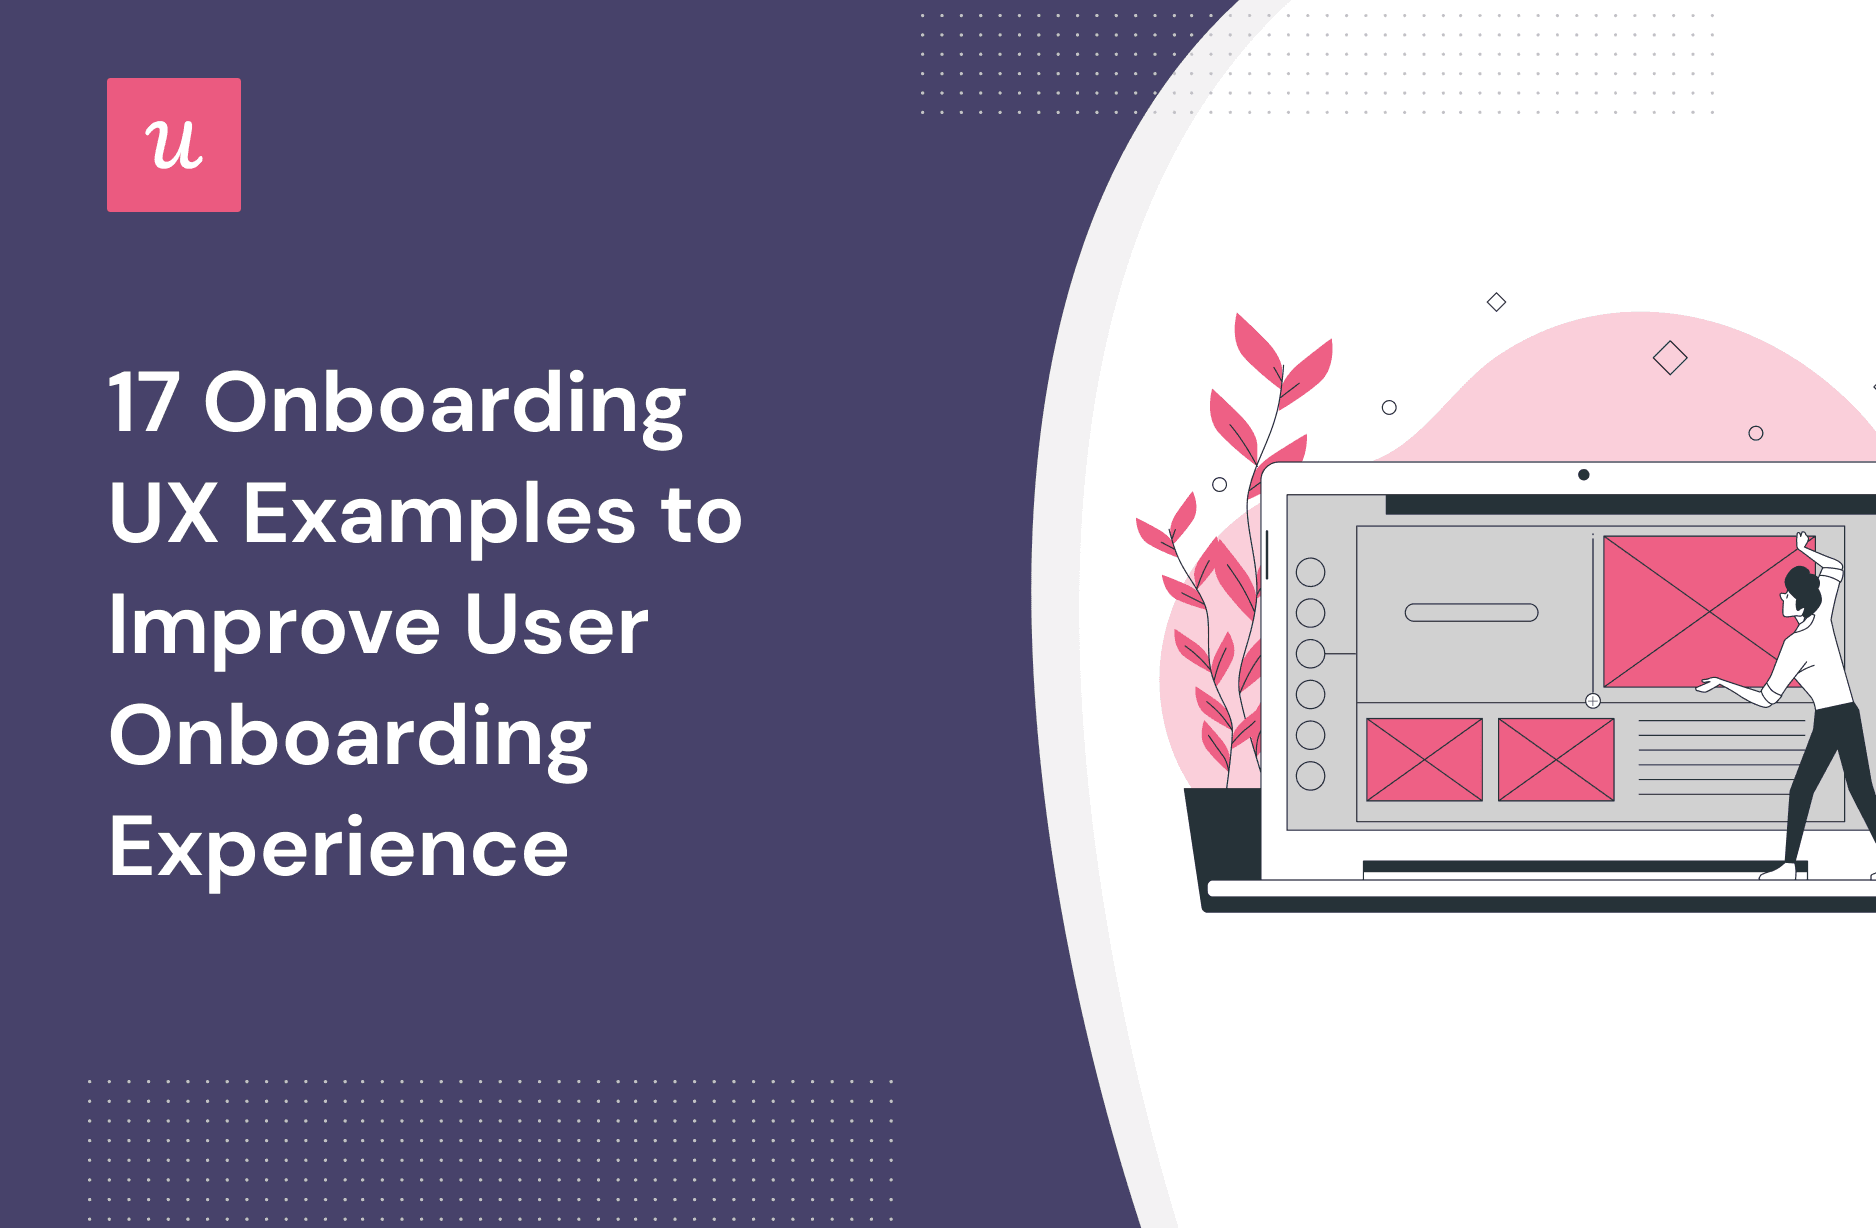 17 Onboarding UX Examples to Improve User Onboarding Experience cover